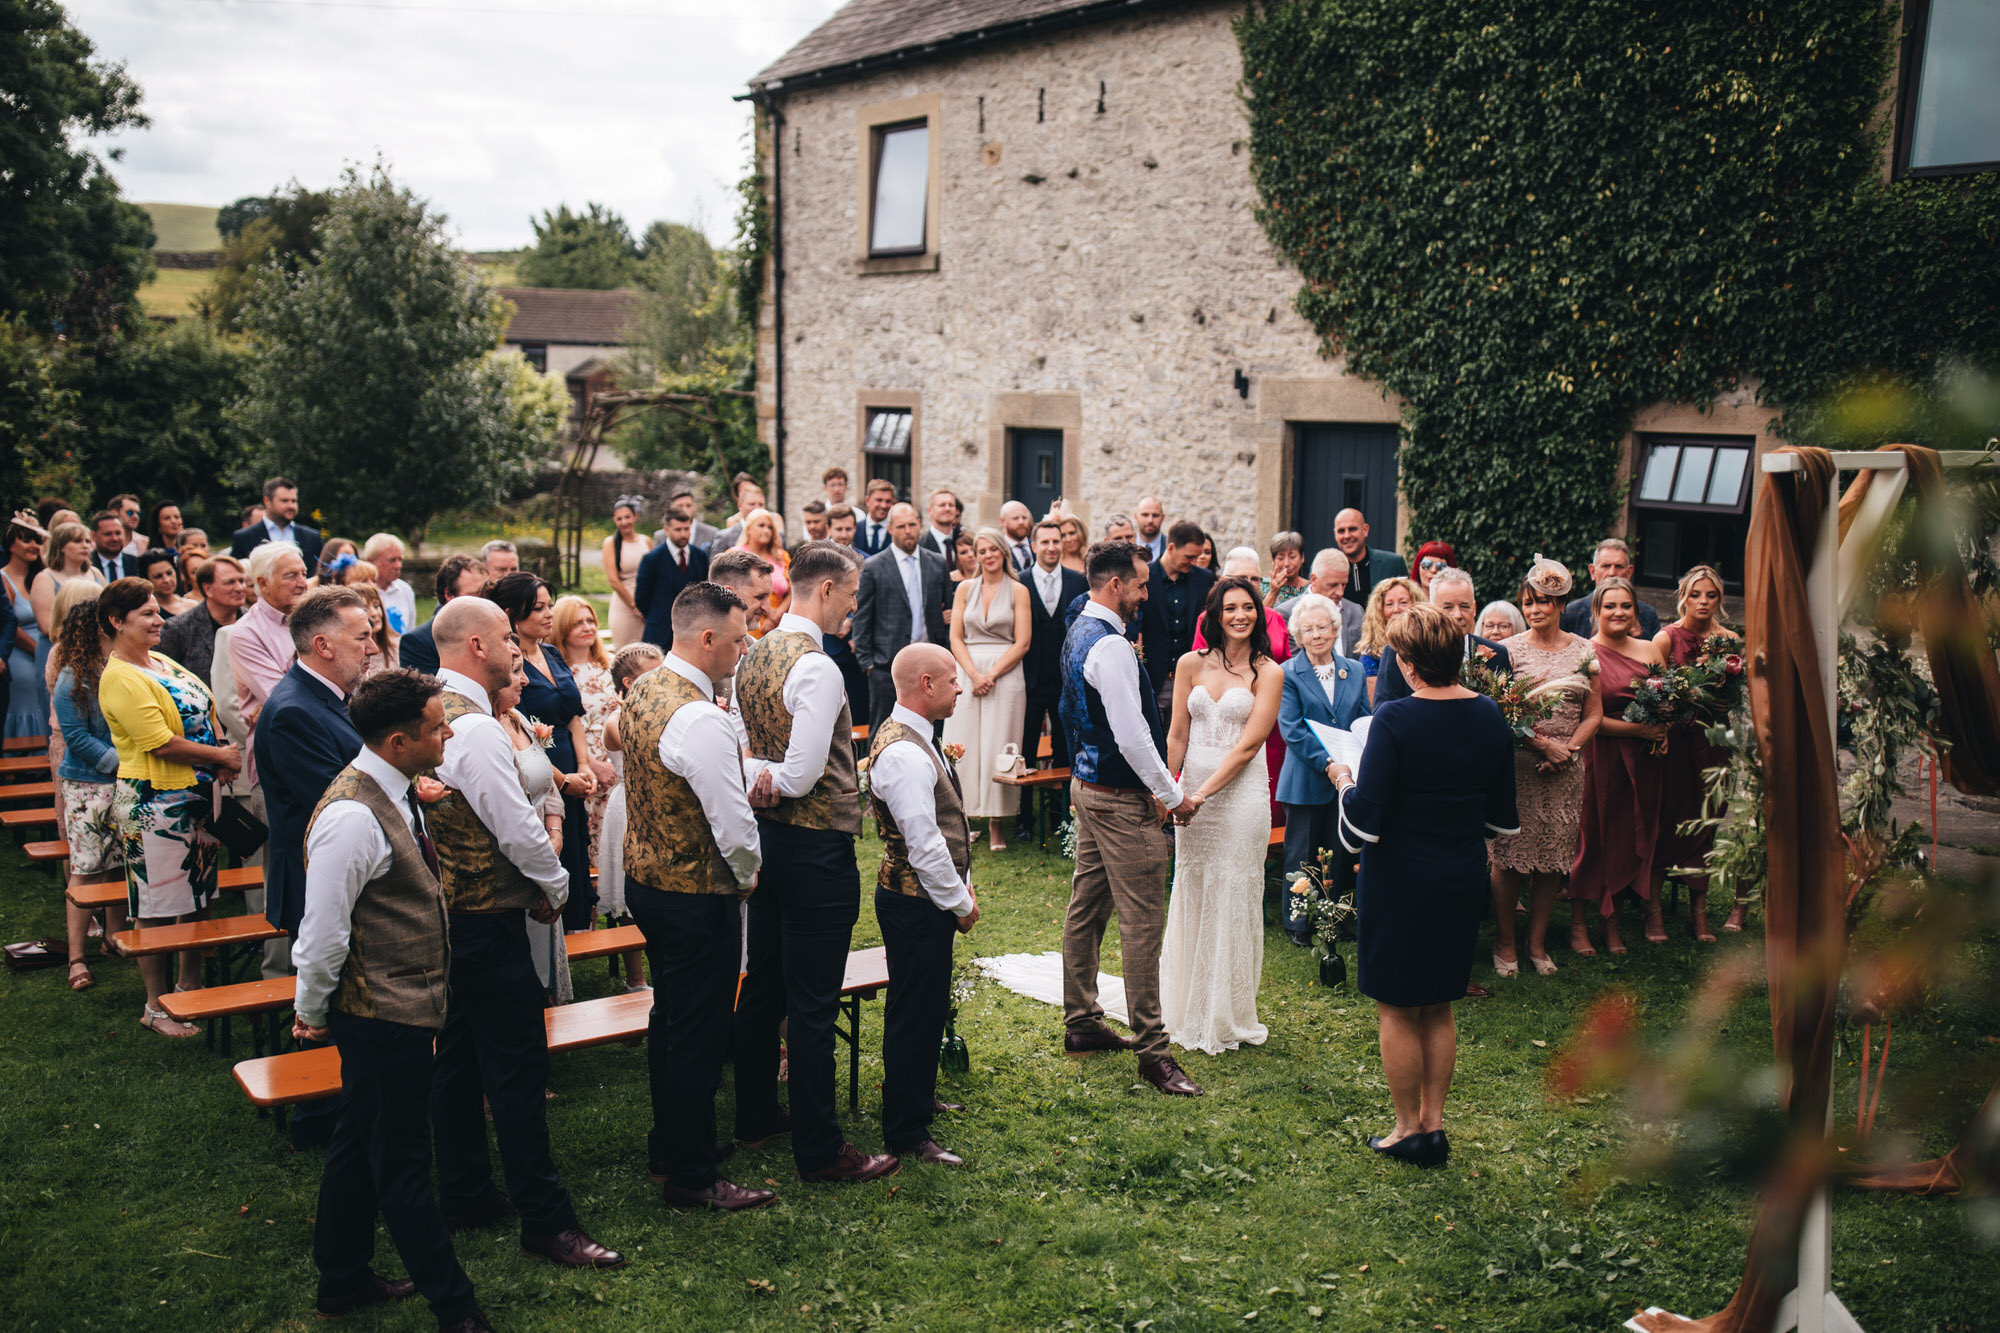 wide view of wedding ceremony outdoors at peak district wedding barn